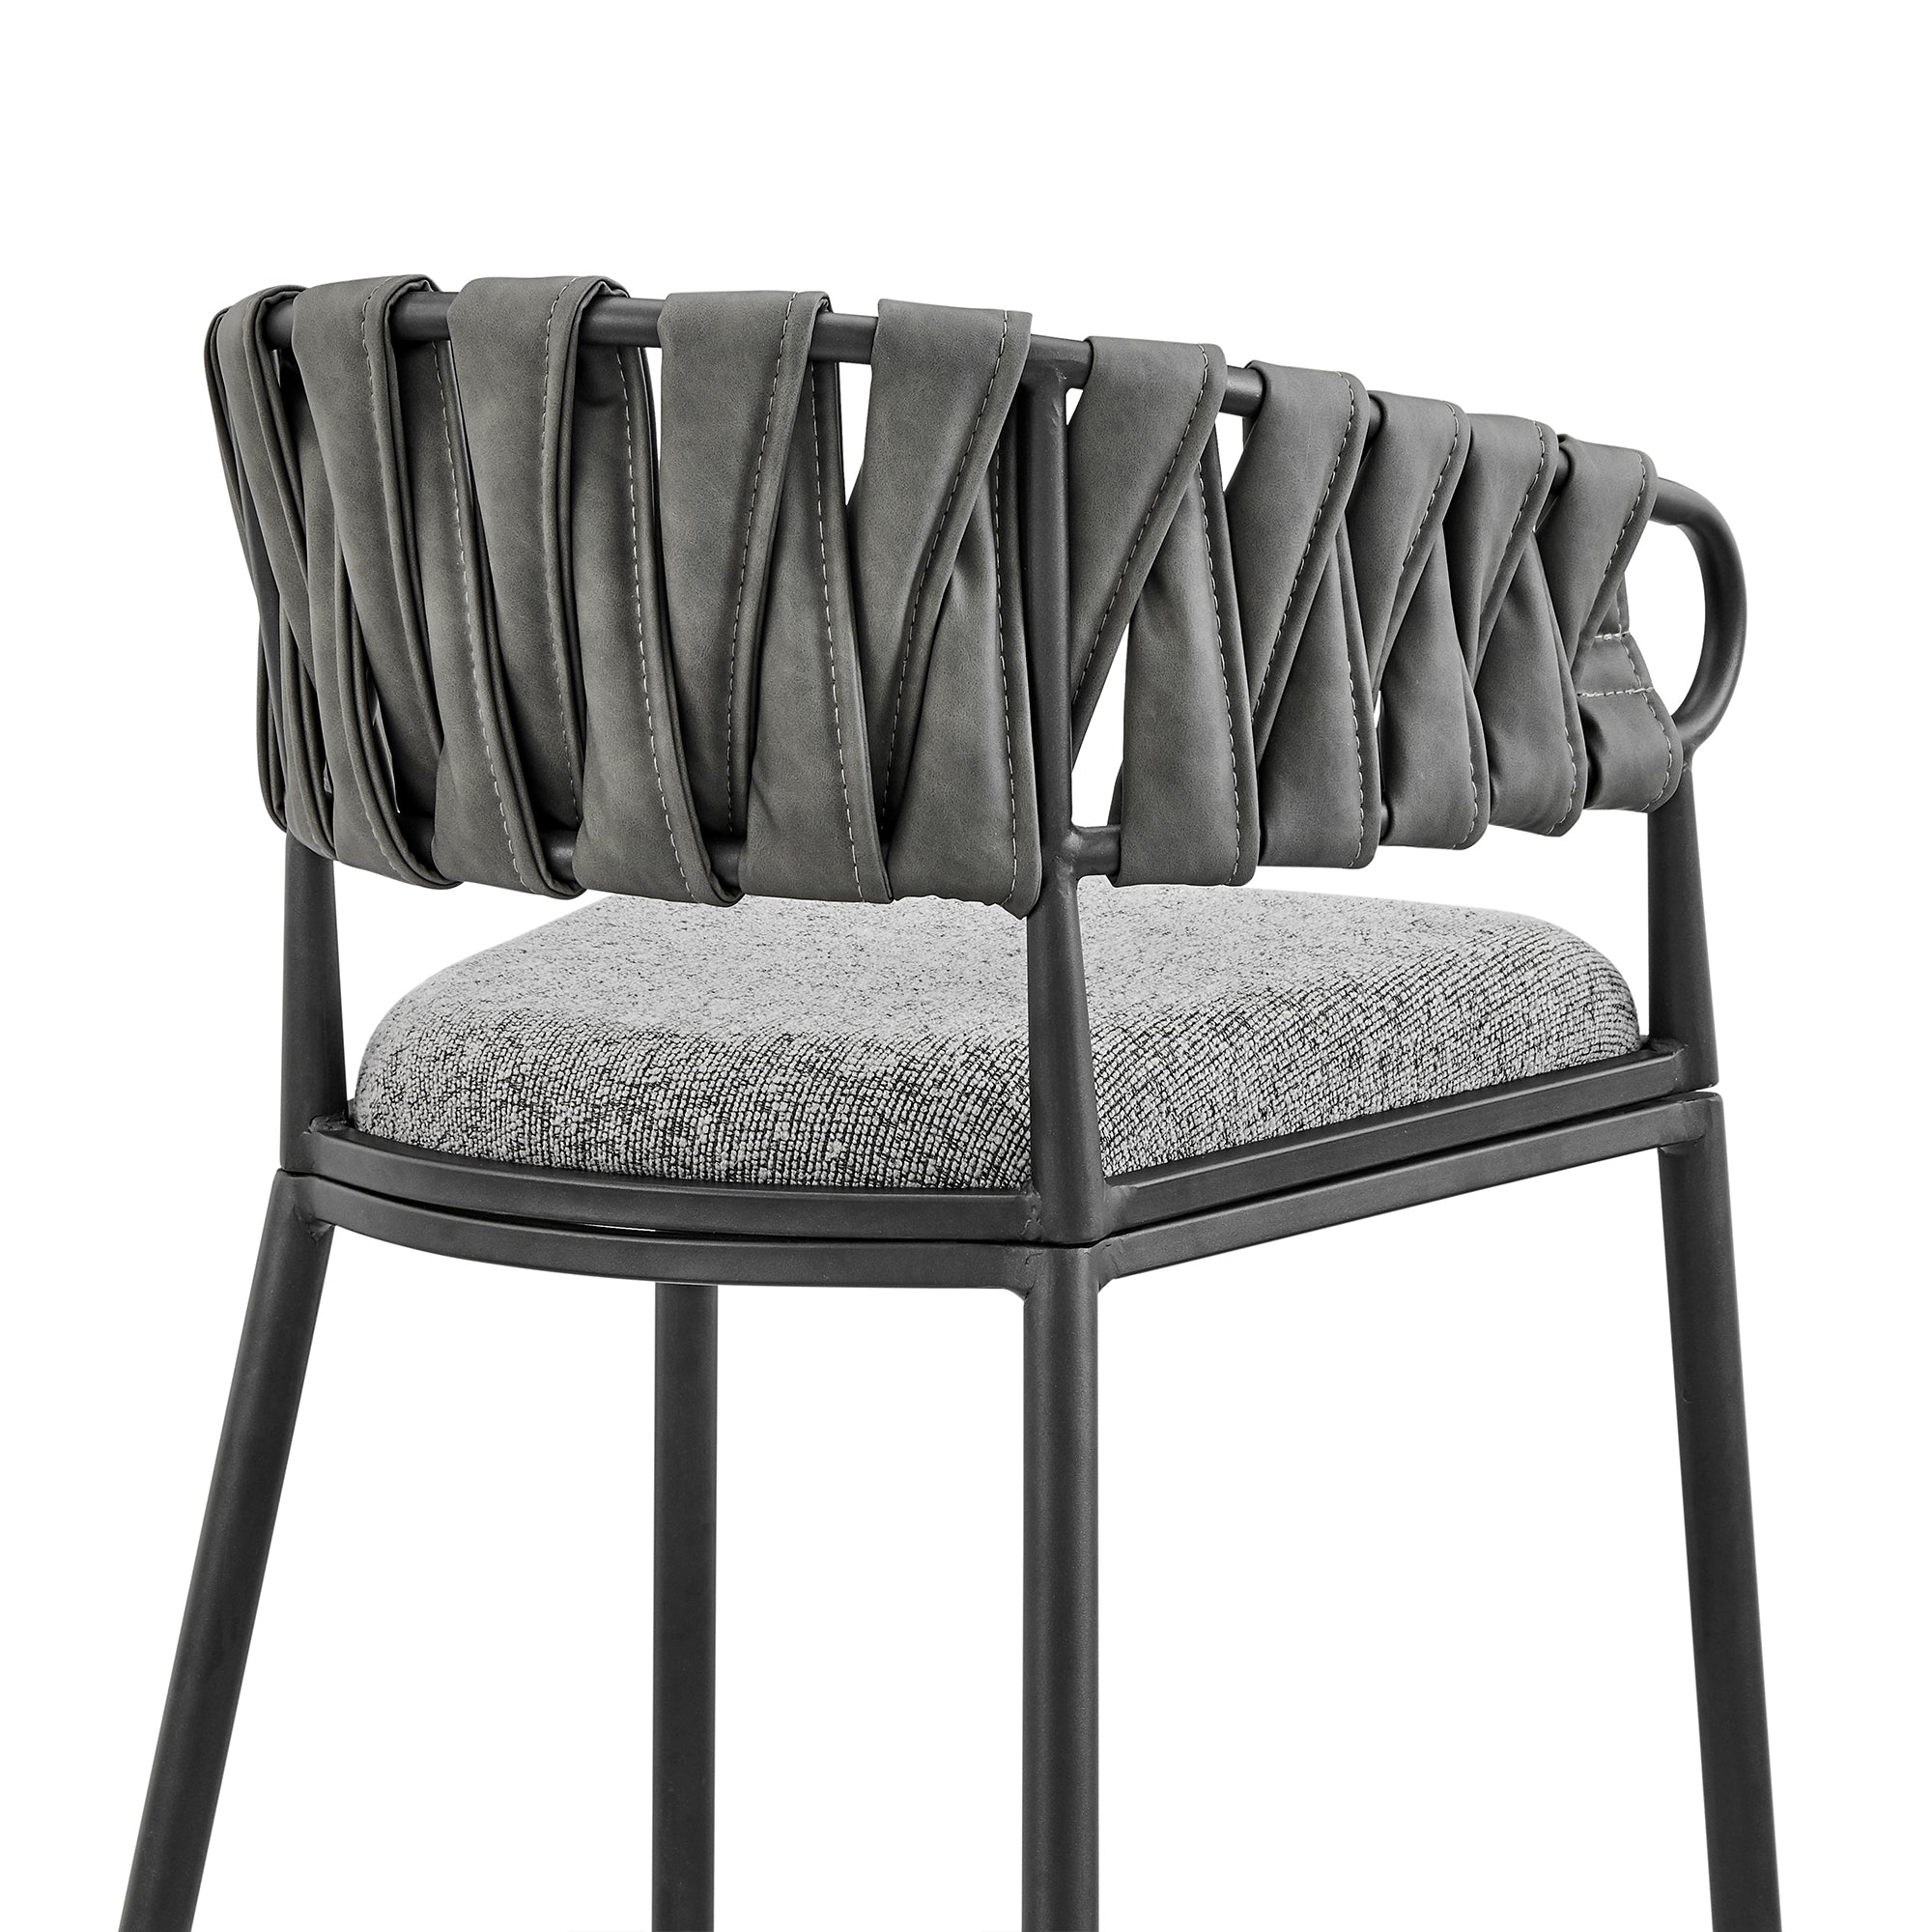 Armen Living - Vigona Coutner or Bar Stool in Black Metal with Grey Fabric and Faux Leather - 840254335561